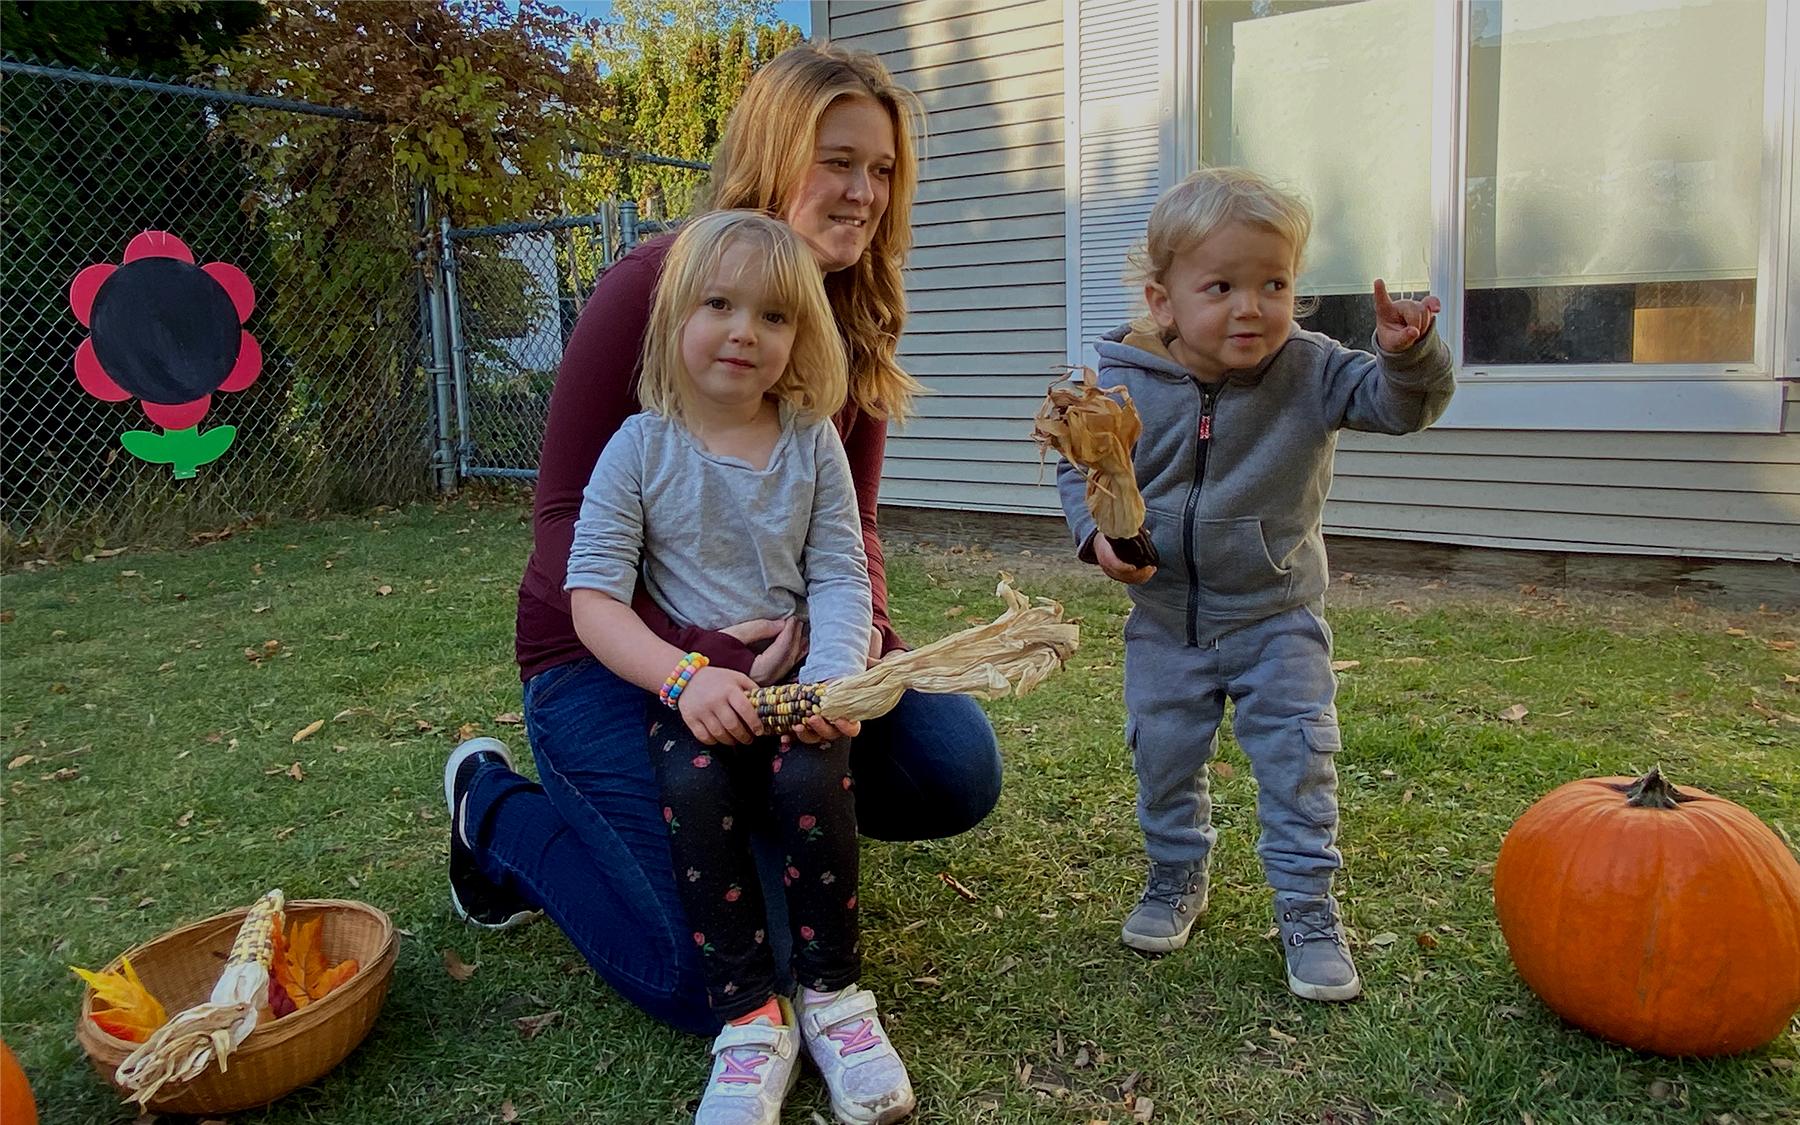 Family of 3 outside with a pumpkin